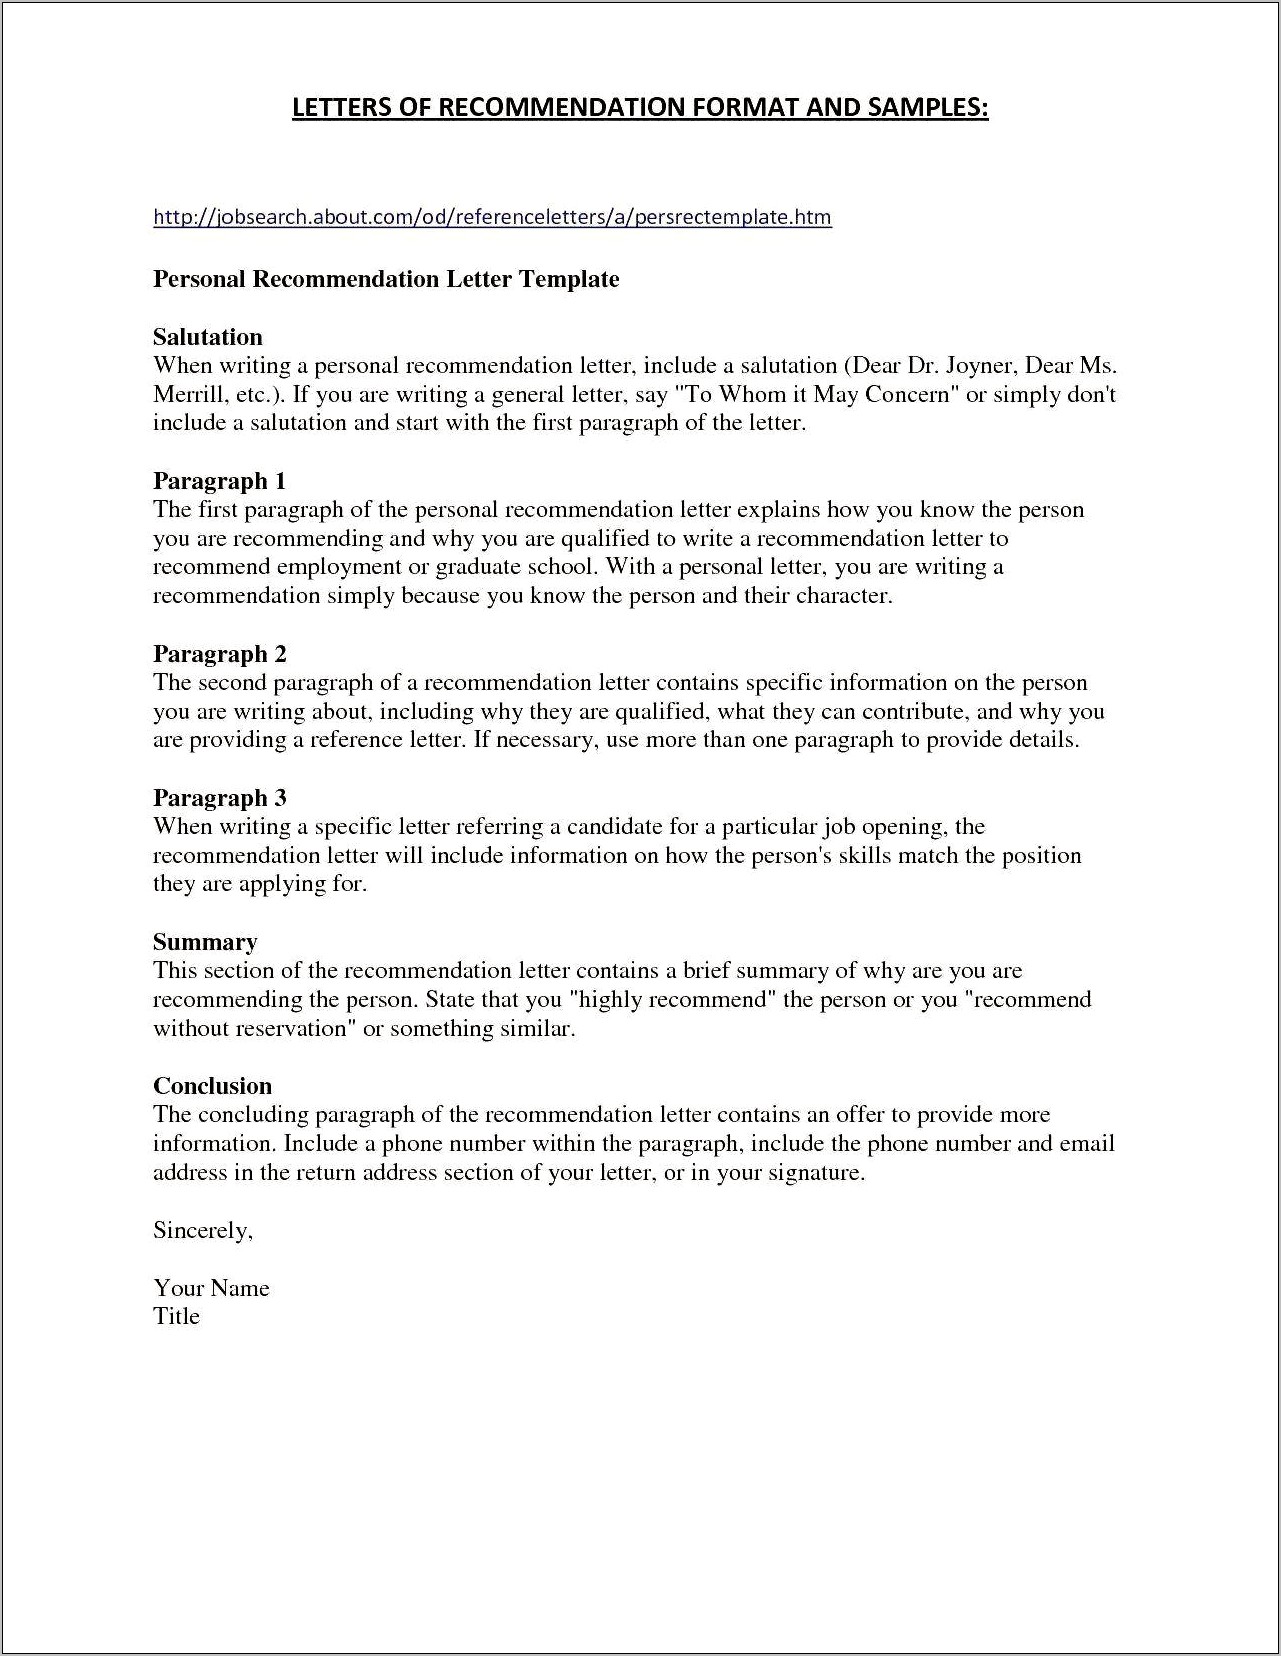 Example Resume For Letter Of Recommendation